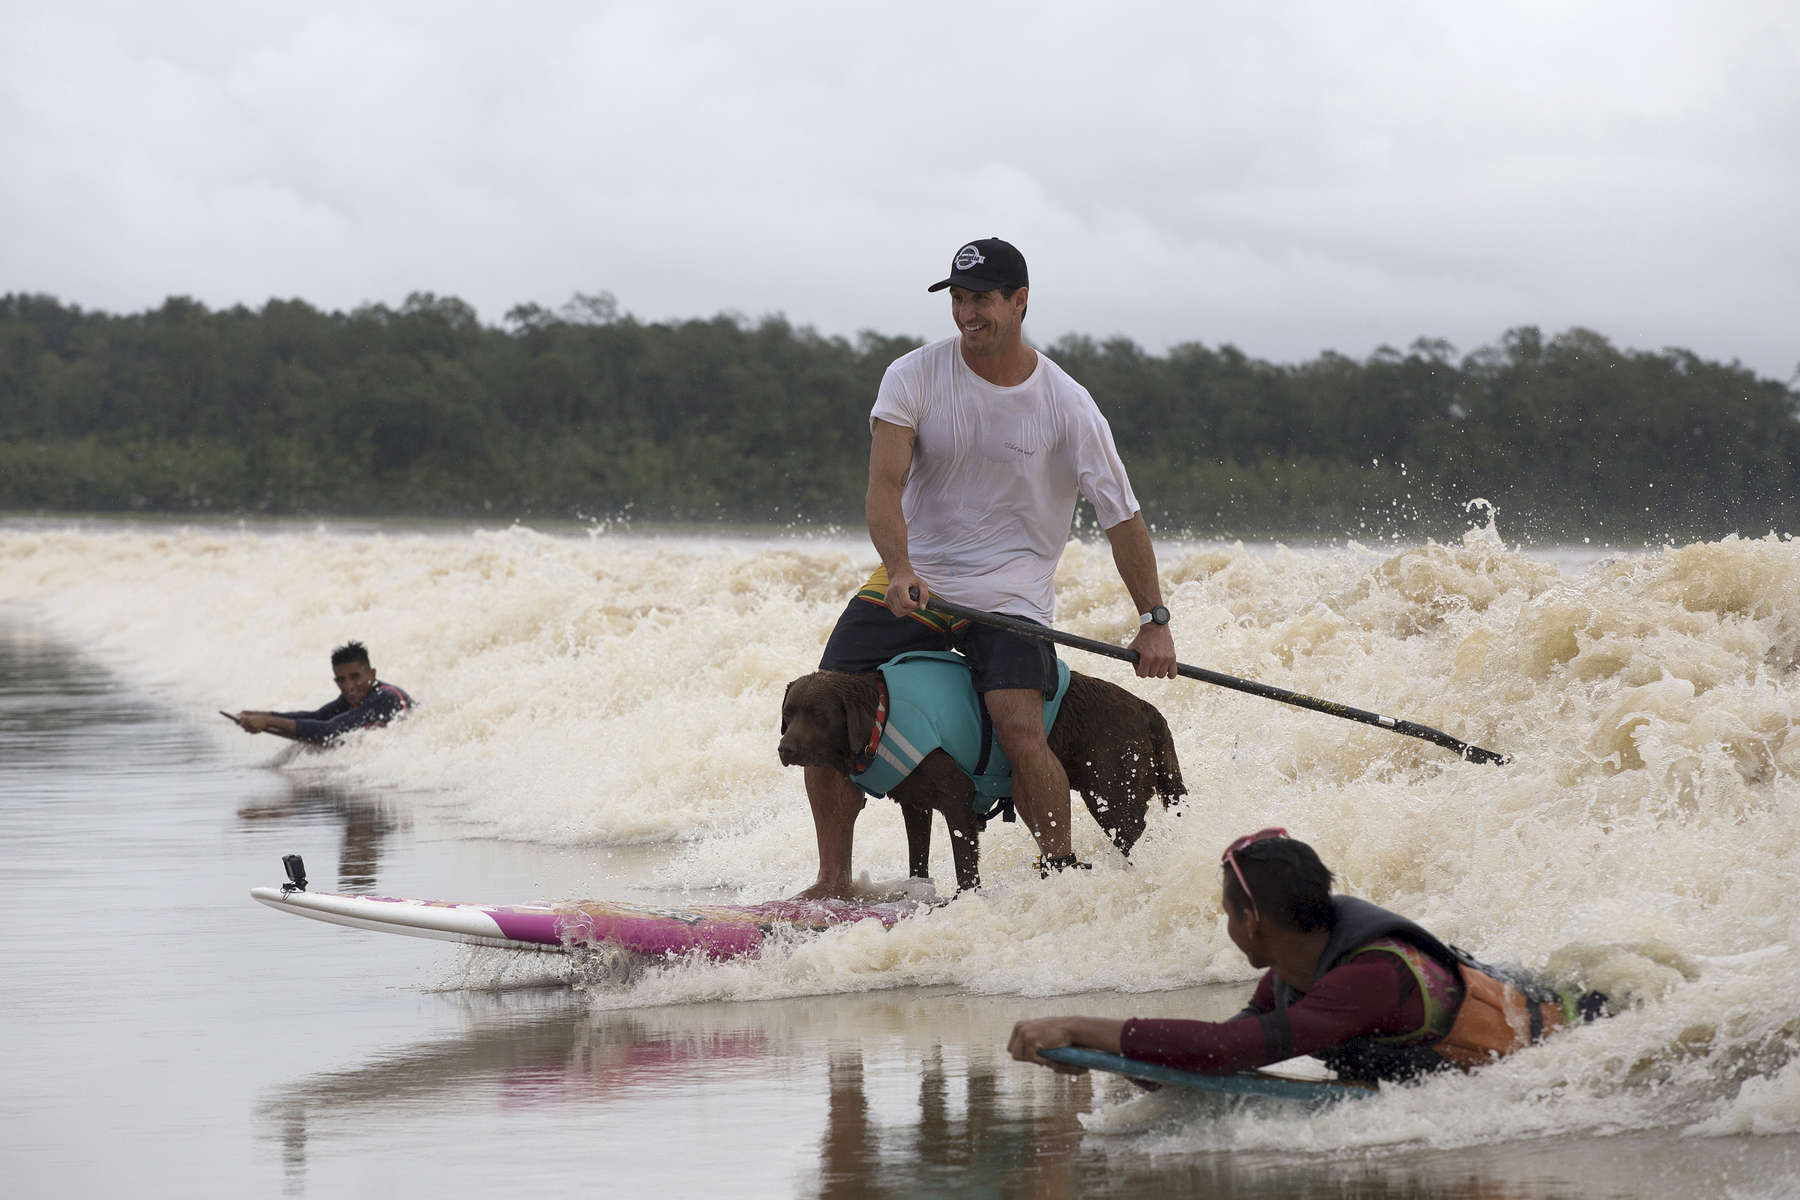 Ivan Moreira and Bono surf the tidal bore wave in between locals Valdinei Farias Mendes and Ruan Maciel Borges. Bono often likes to ride the board this way.